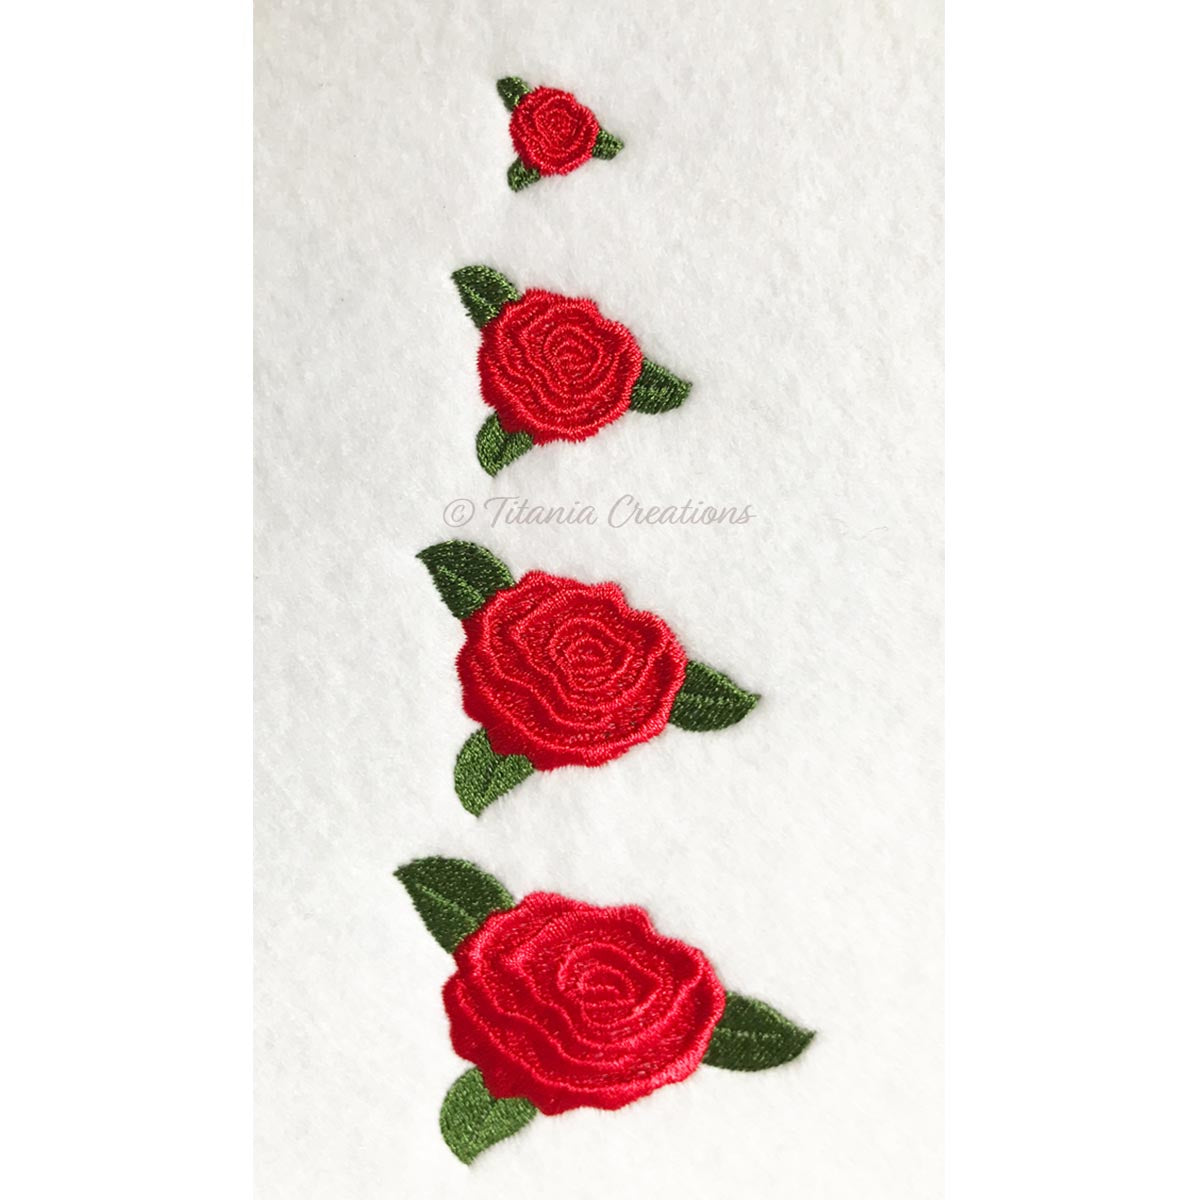 Miniature Rose 4 Sizes Included